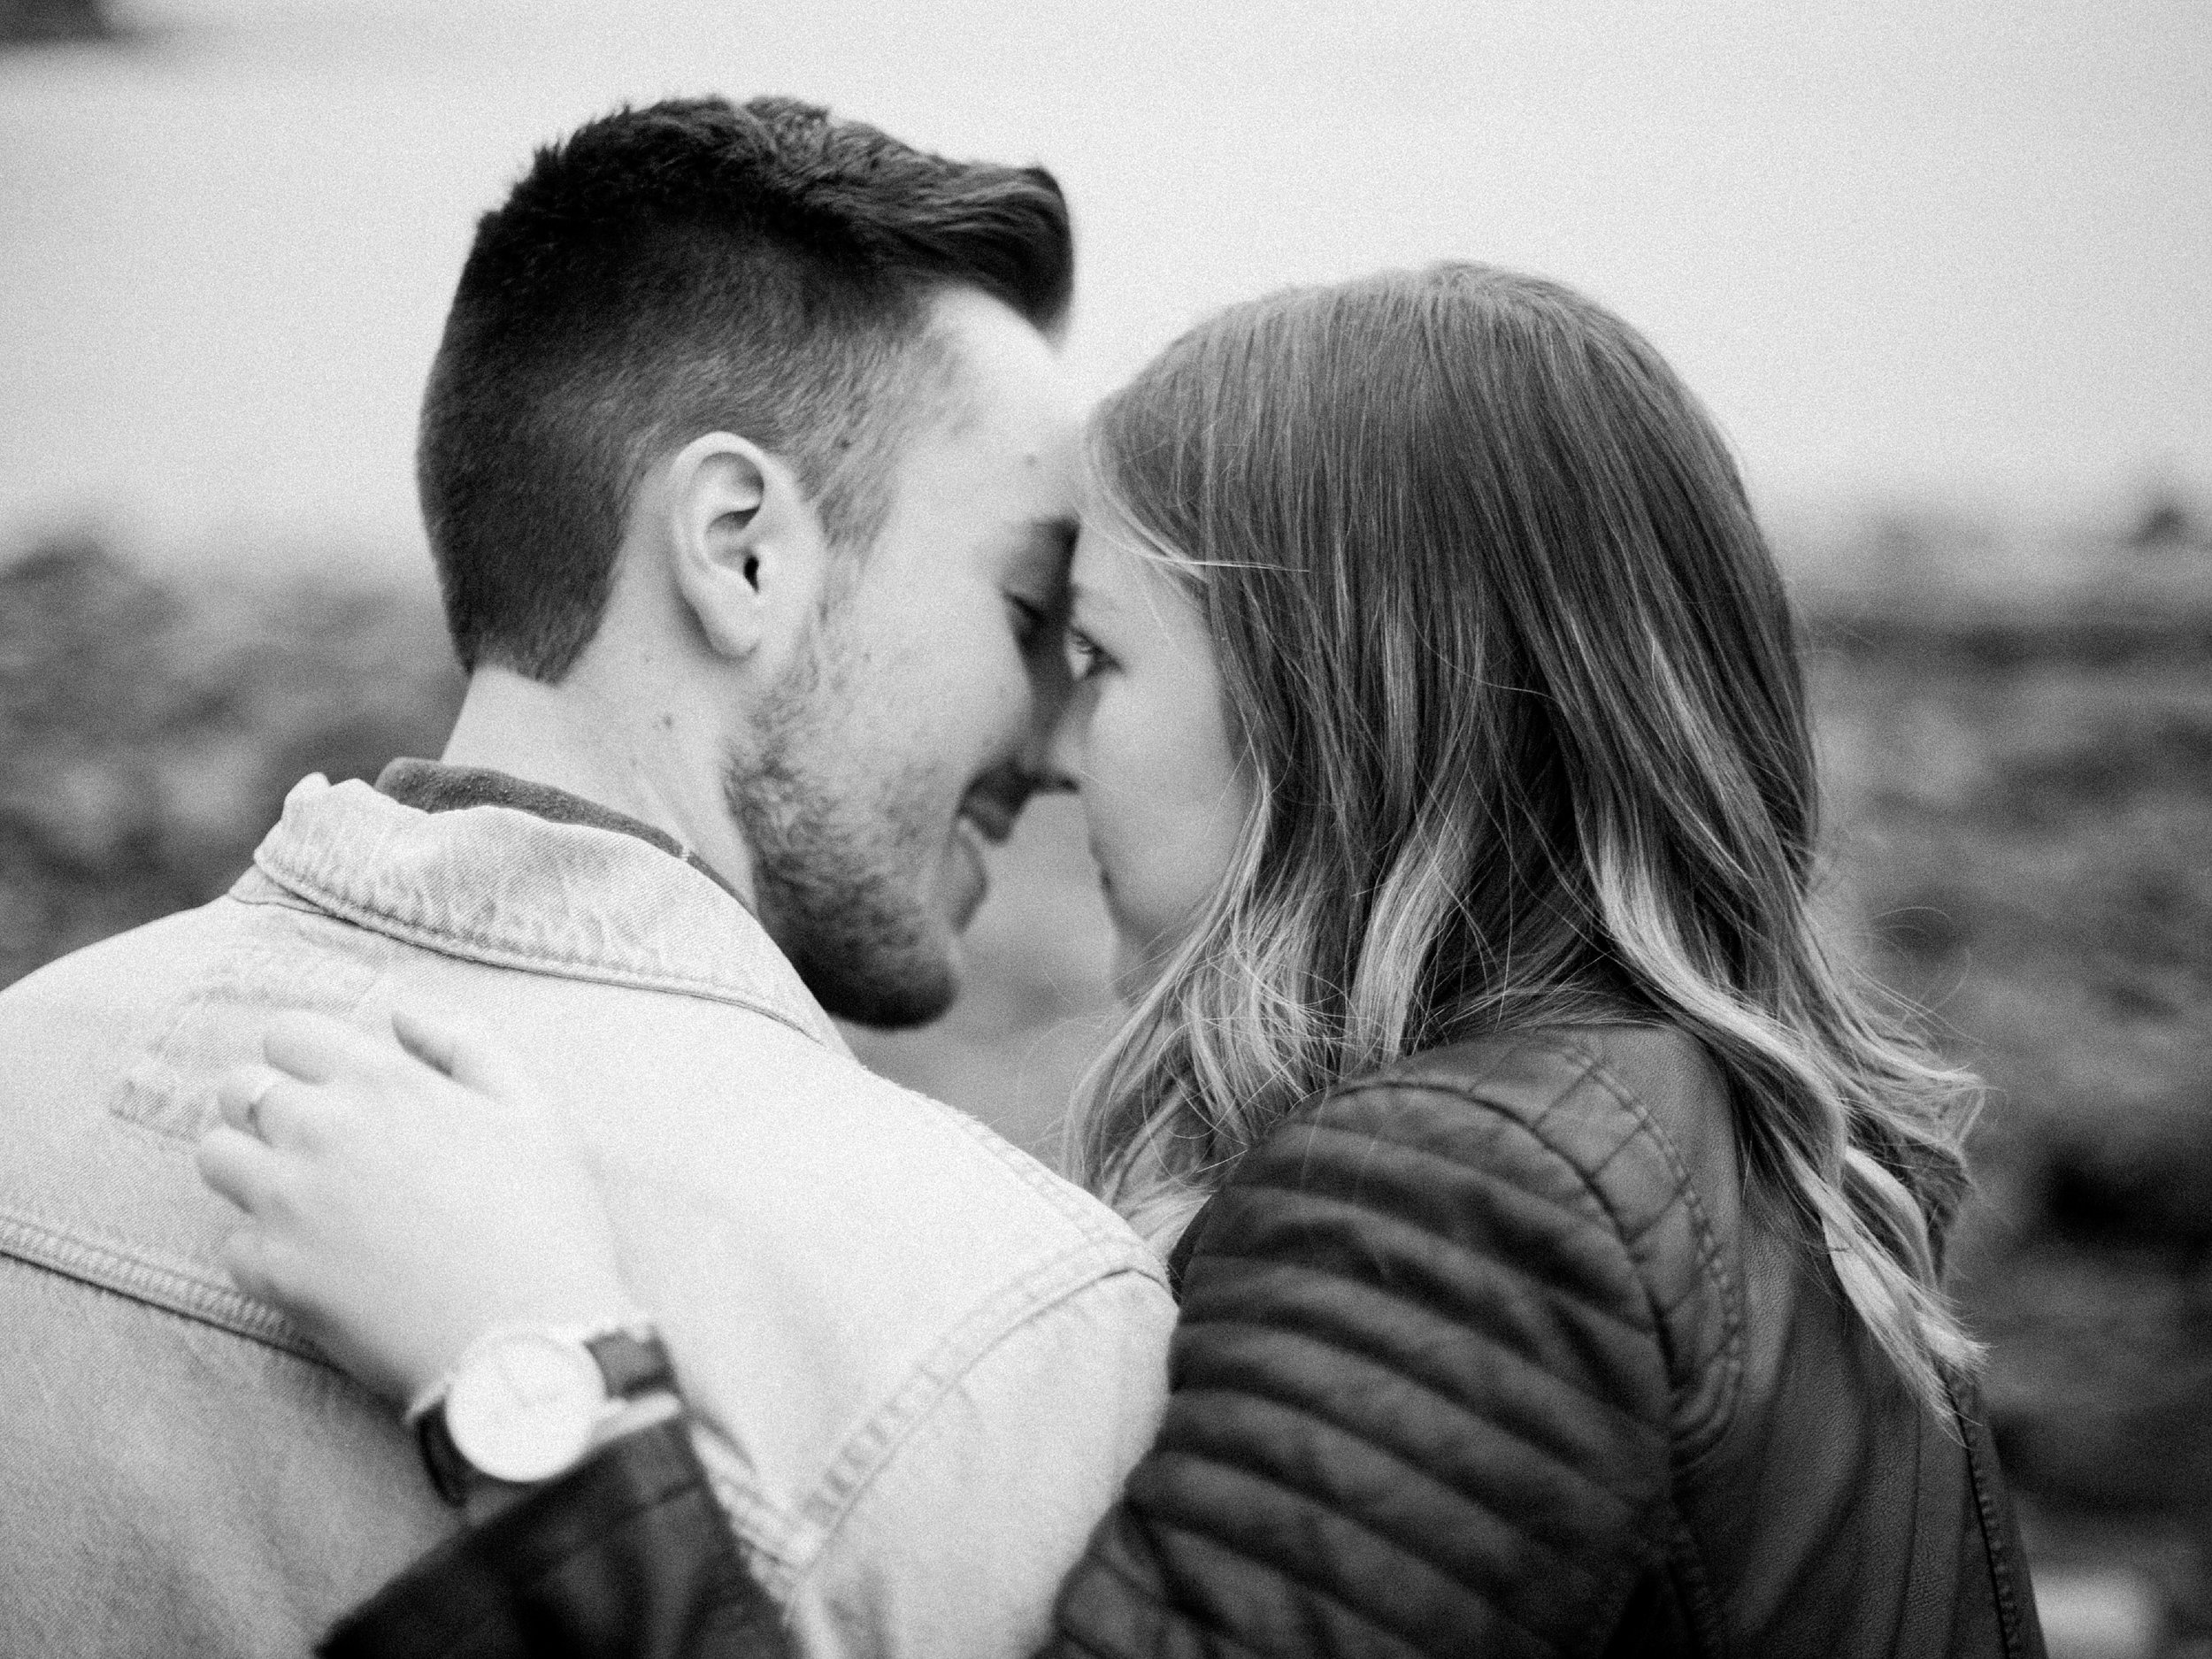 Vancouver Engagement Session, PNW Wedding Photographer, Cute Engagement Session poses, Keila Marie Photography